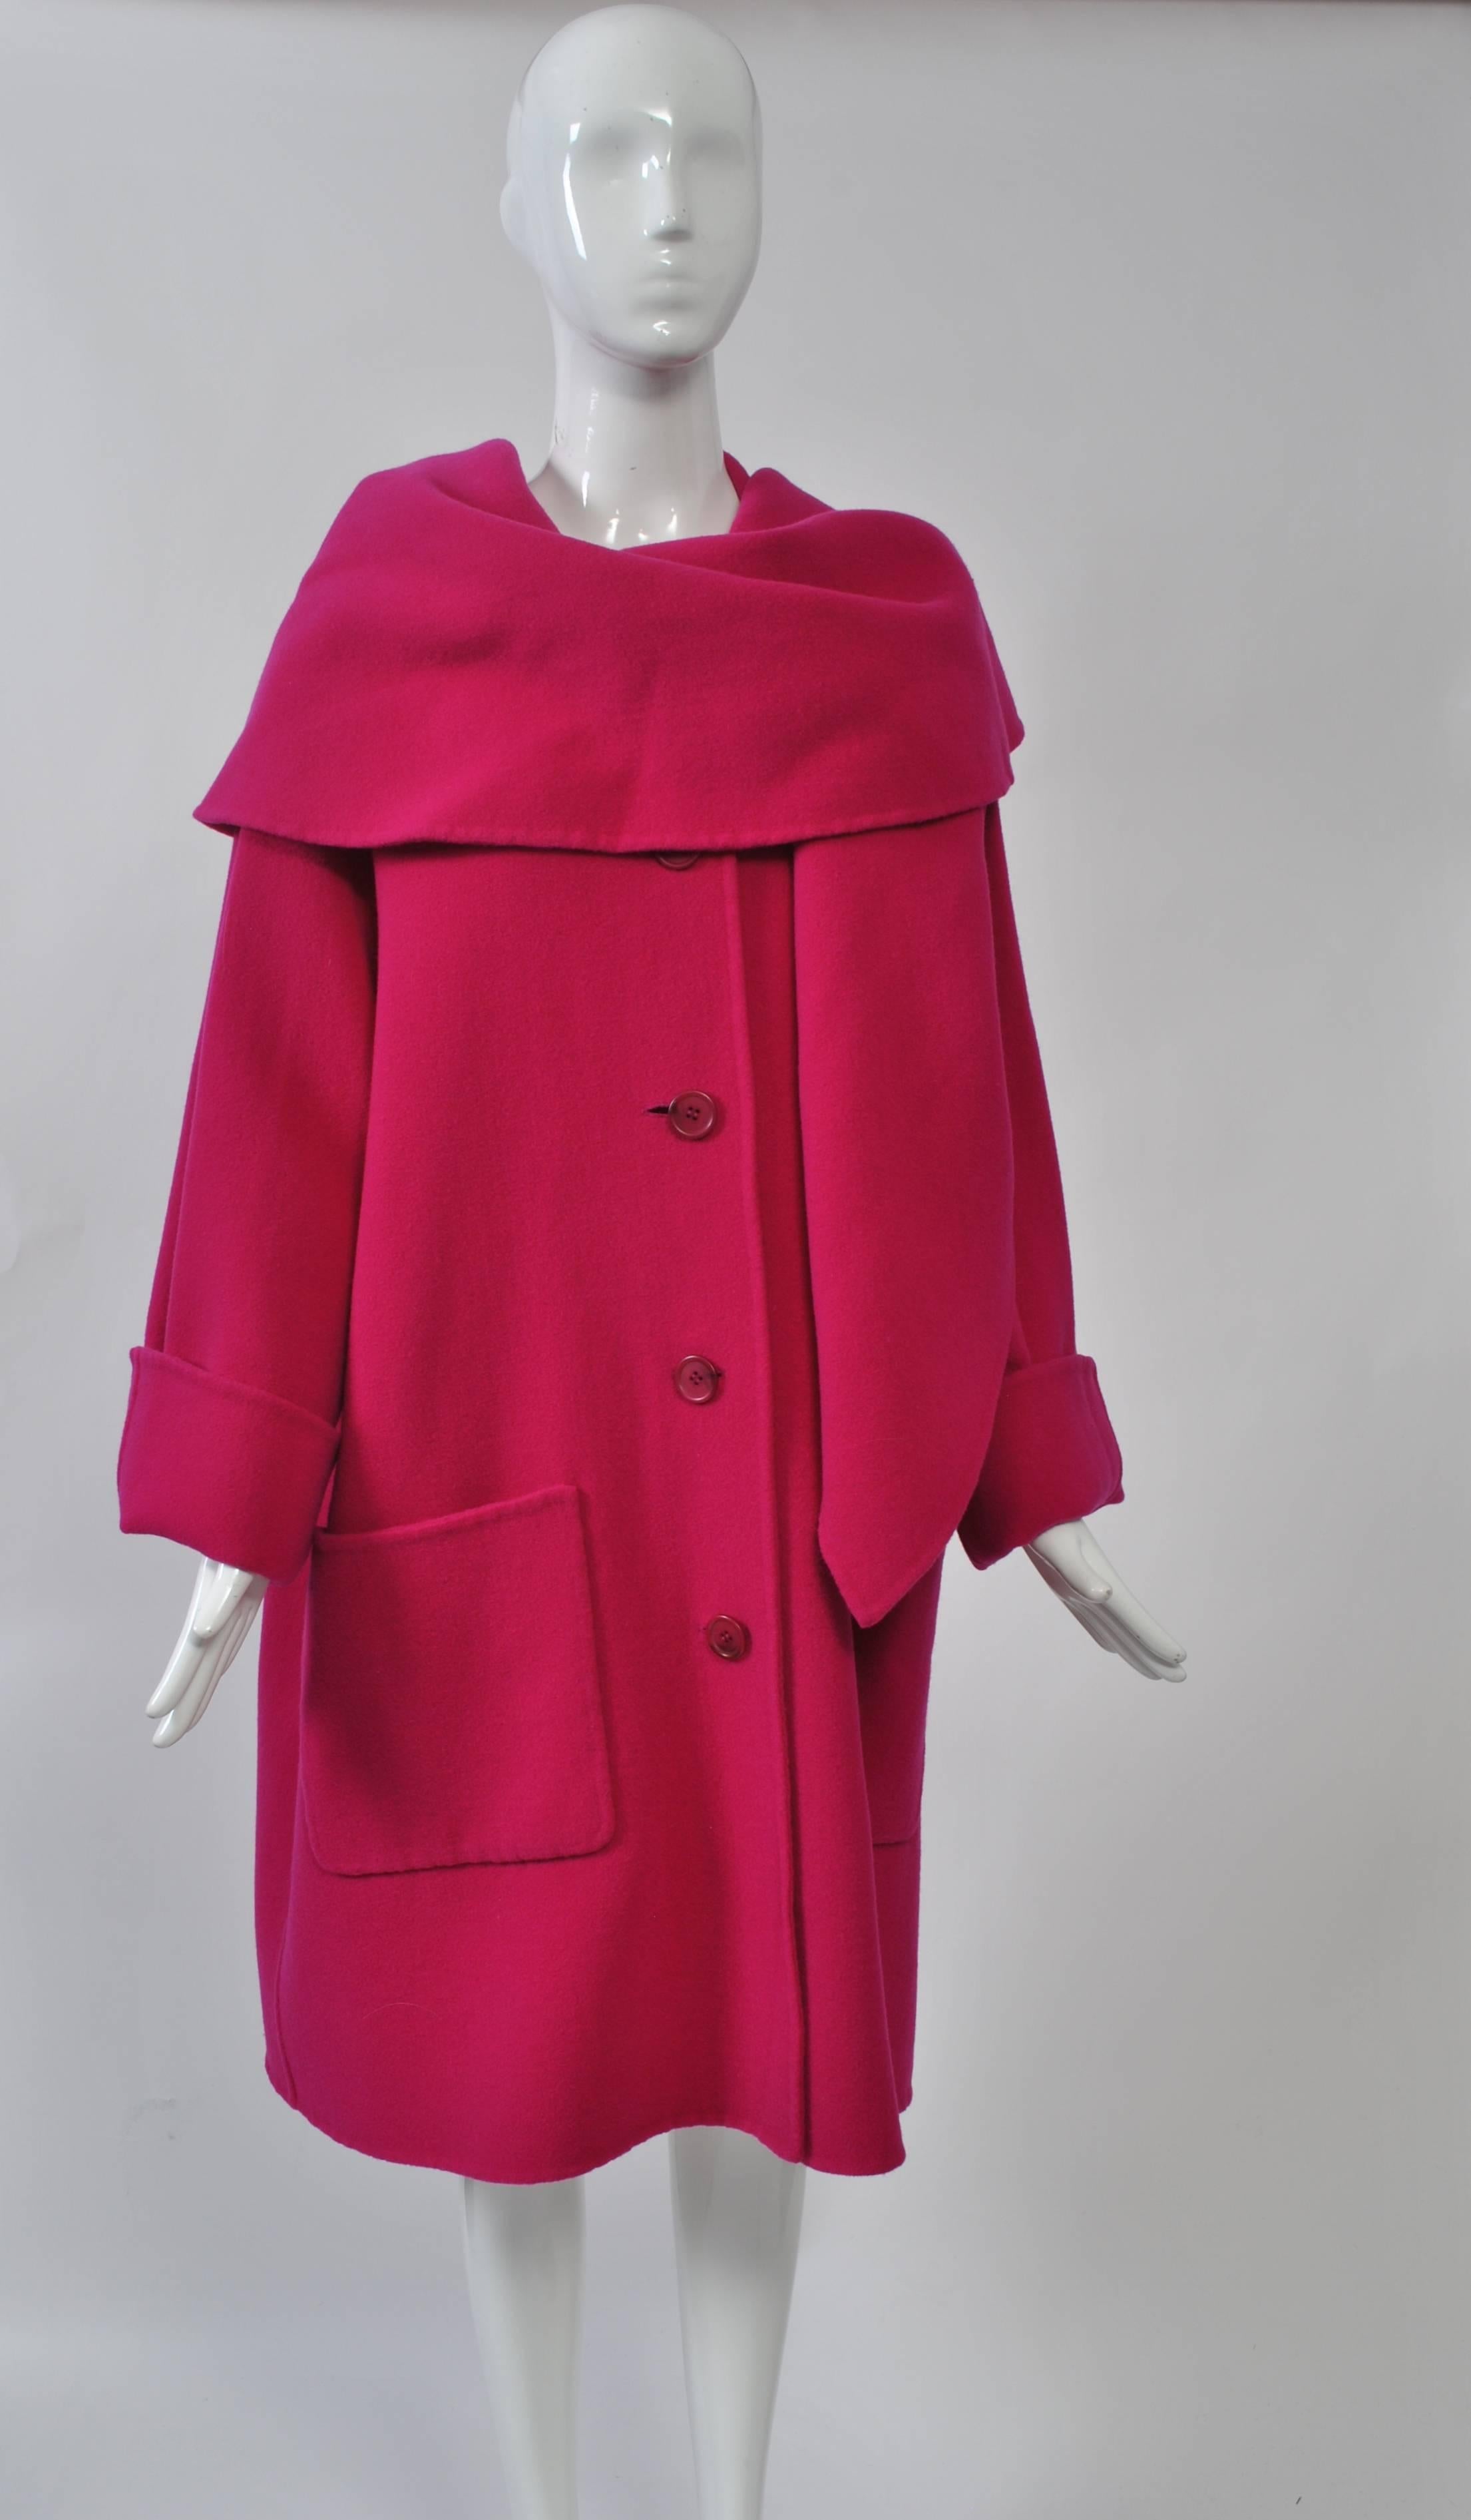 Double-faced fuchsia wool swing coat with deep shawl collar, single breasted with low patch pocket and turn-back cuffs. Welted seams. Unlabeled. Size M.